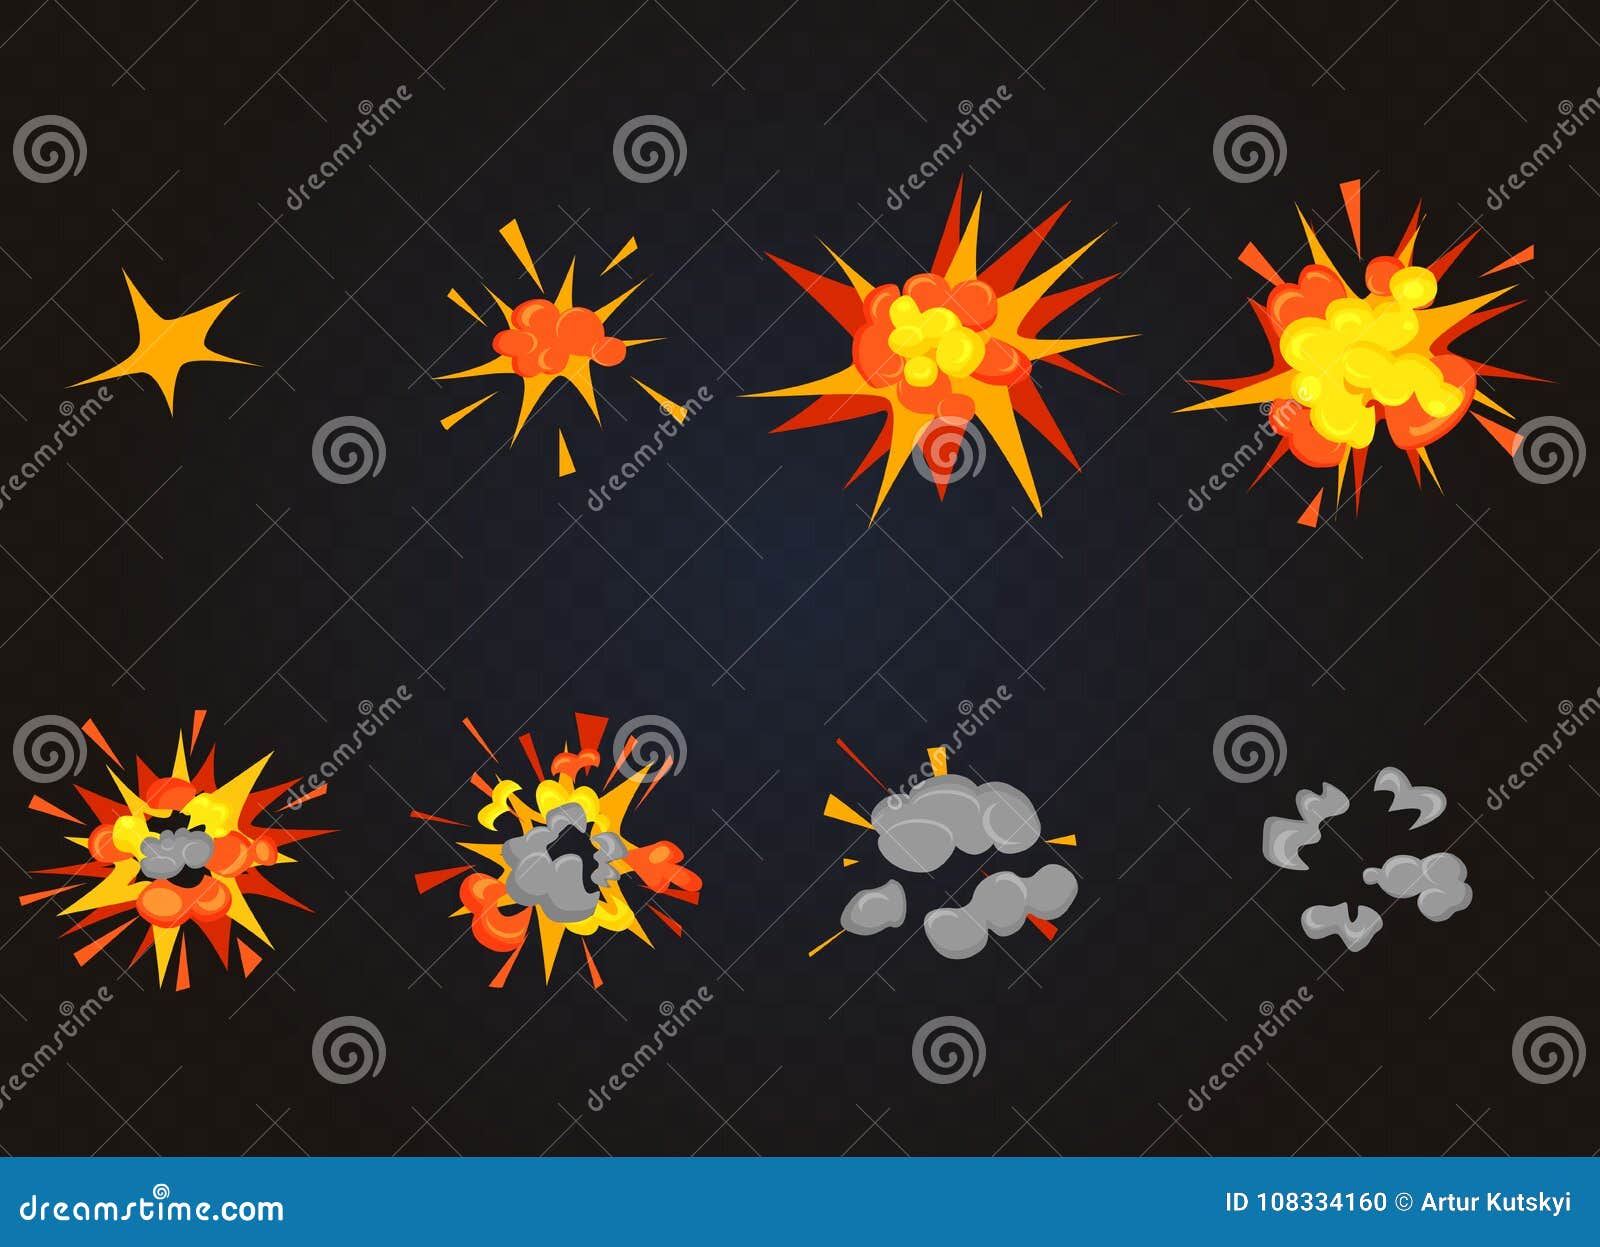 Top View of Vector Flash Explosion Effect, Bomb Boom. Cartoon Explosion  Animation Game Frames. Stock Vector - Illustration of animated, energy:  108334160